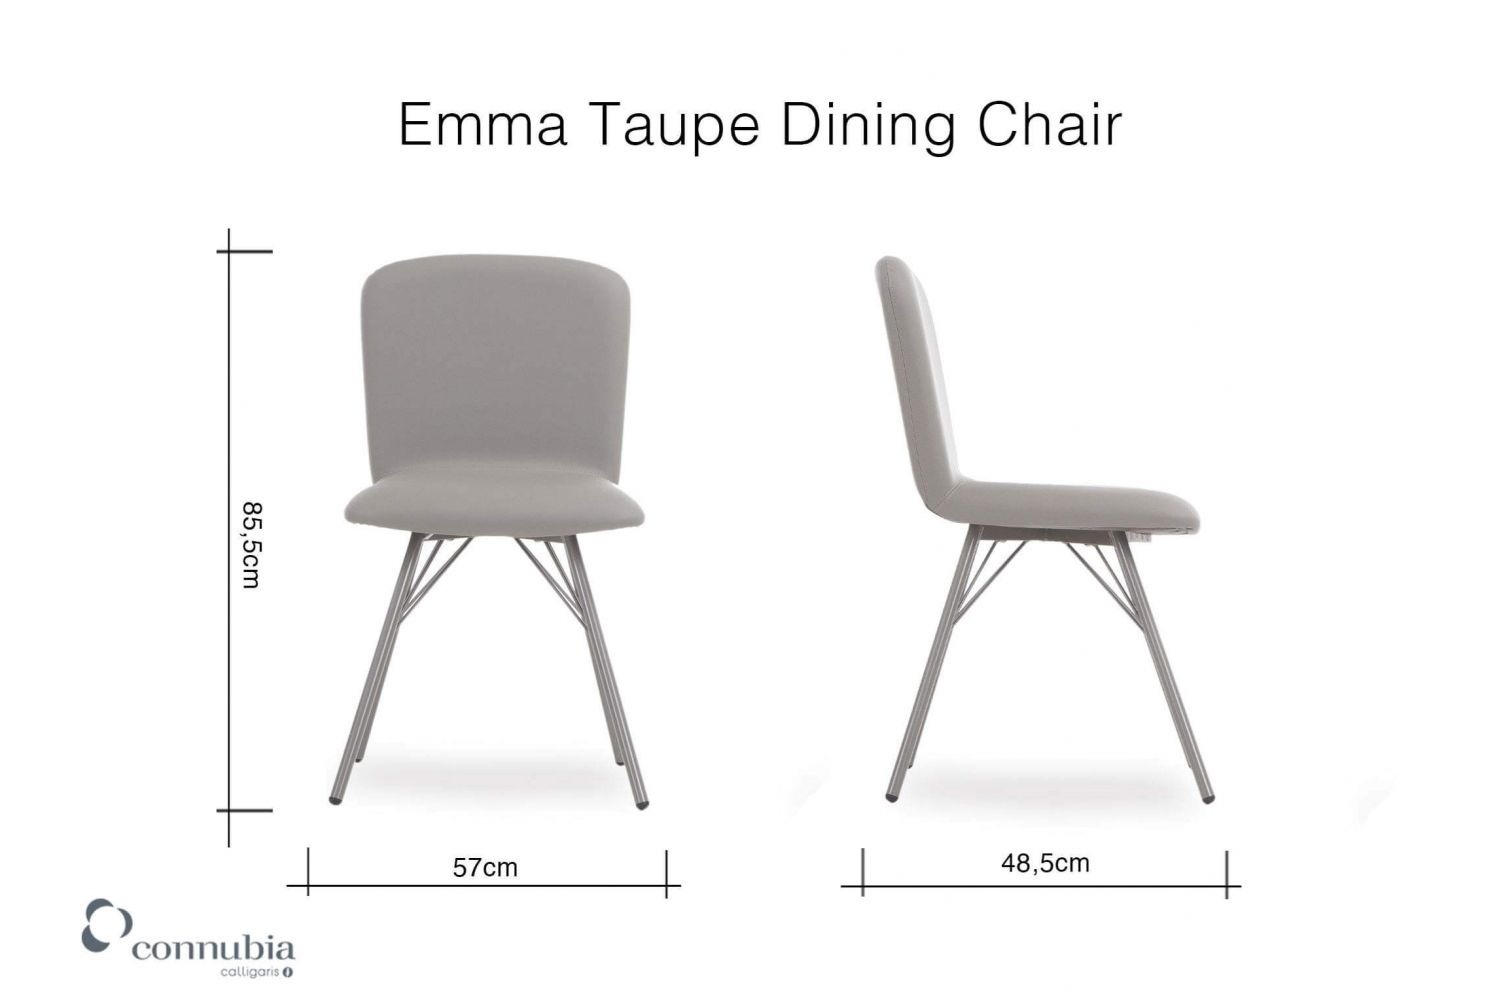 Taupe Faux Leather Dining Chair - Emma - Ez Living Furniture tout Ez Living Dining Chairs 